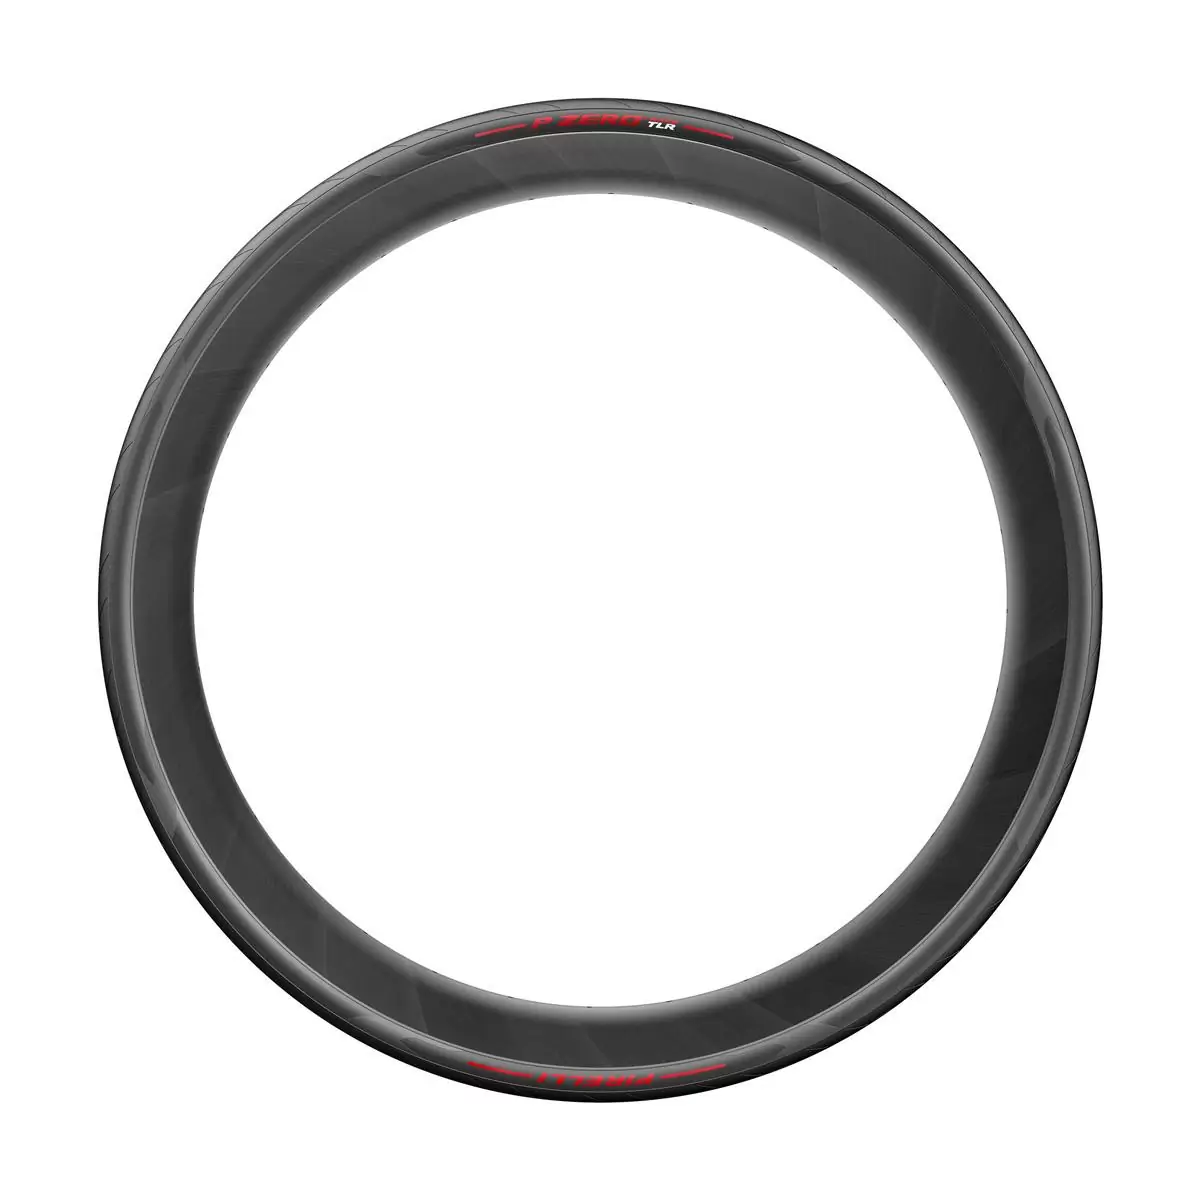 Tire P ZERO Race TLR 700x26c Tubeless Ready Black Red Label #1